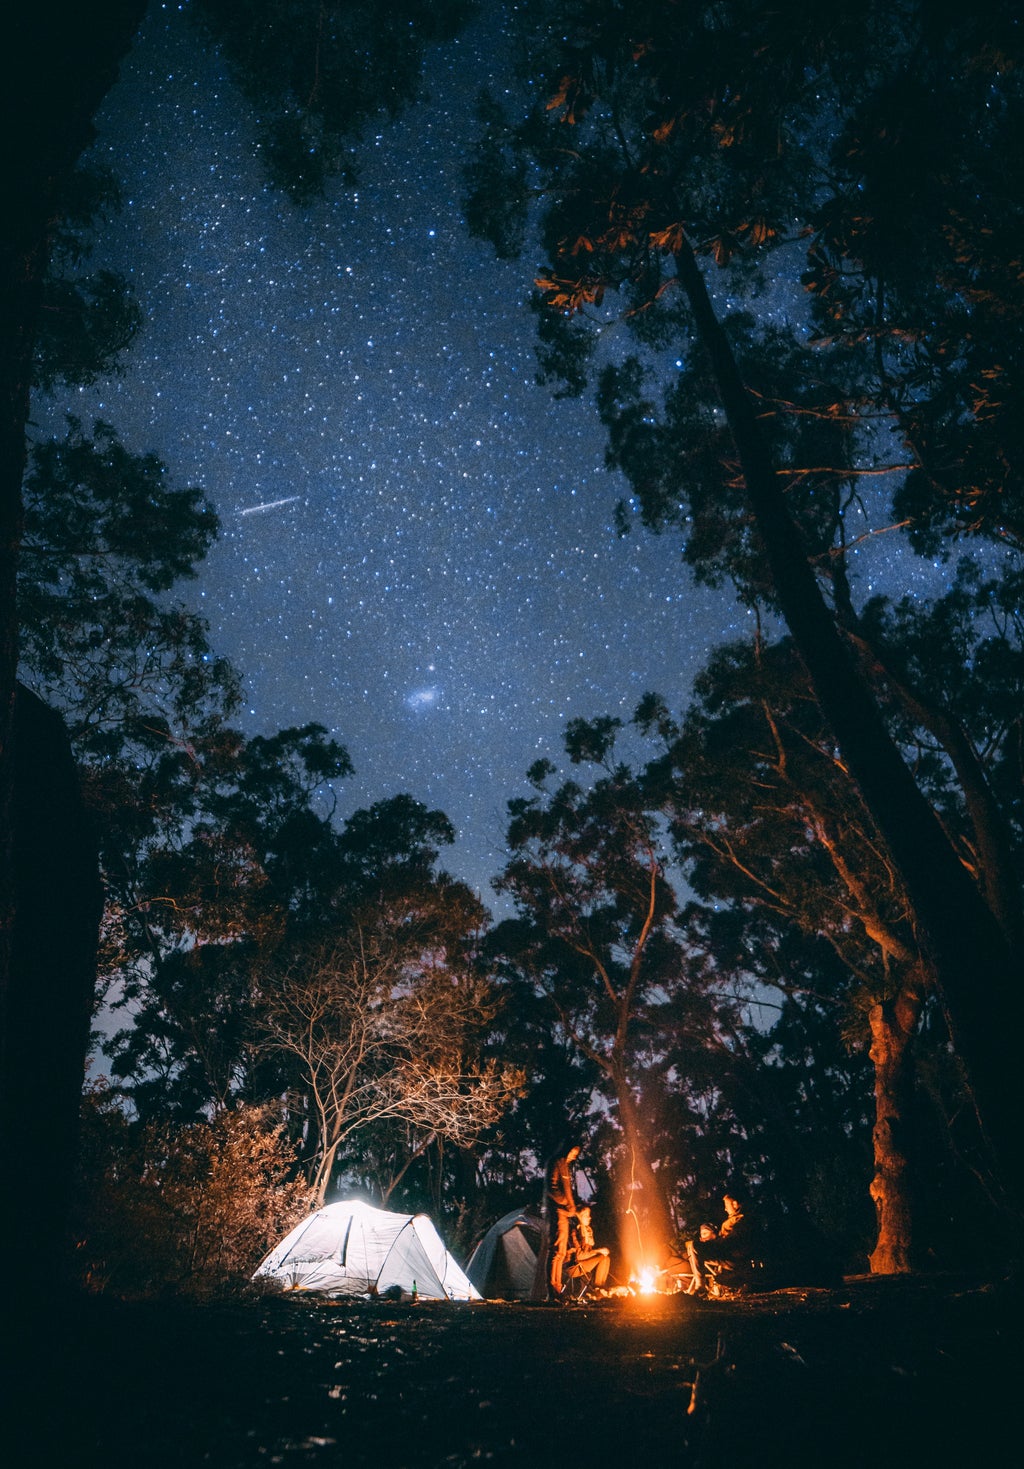 Bonfire and tent under the stars